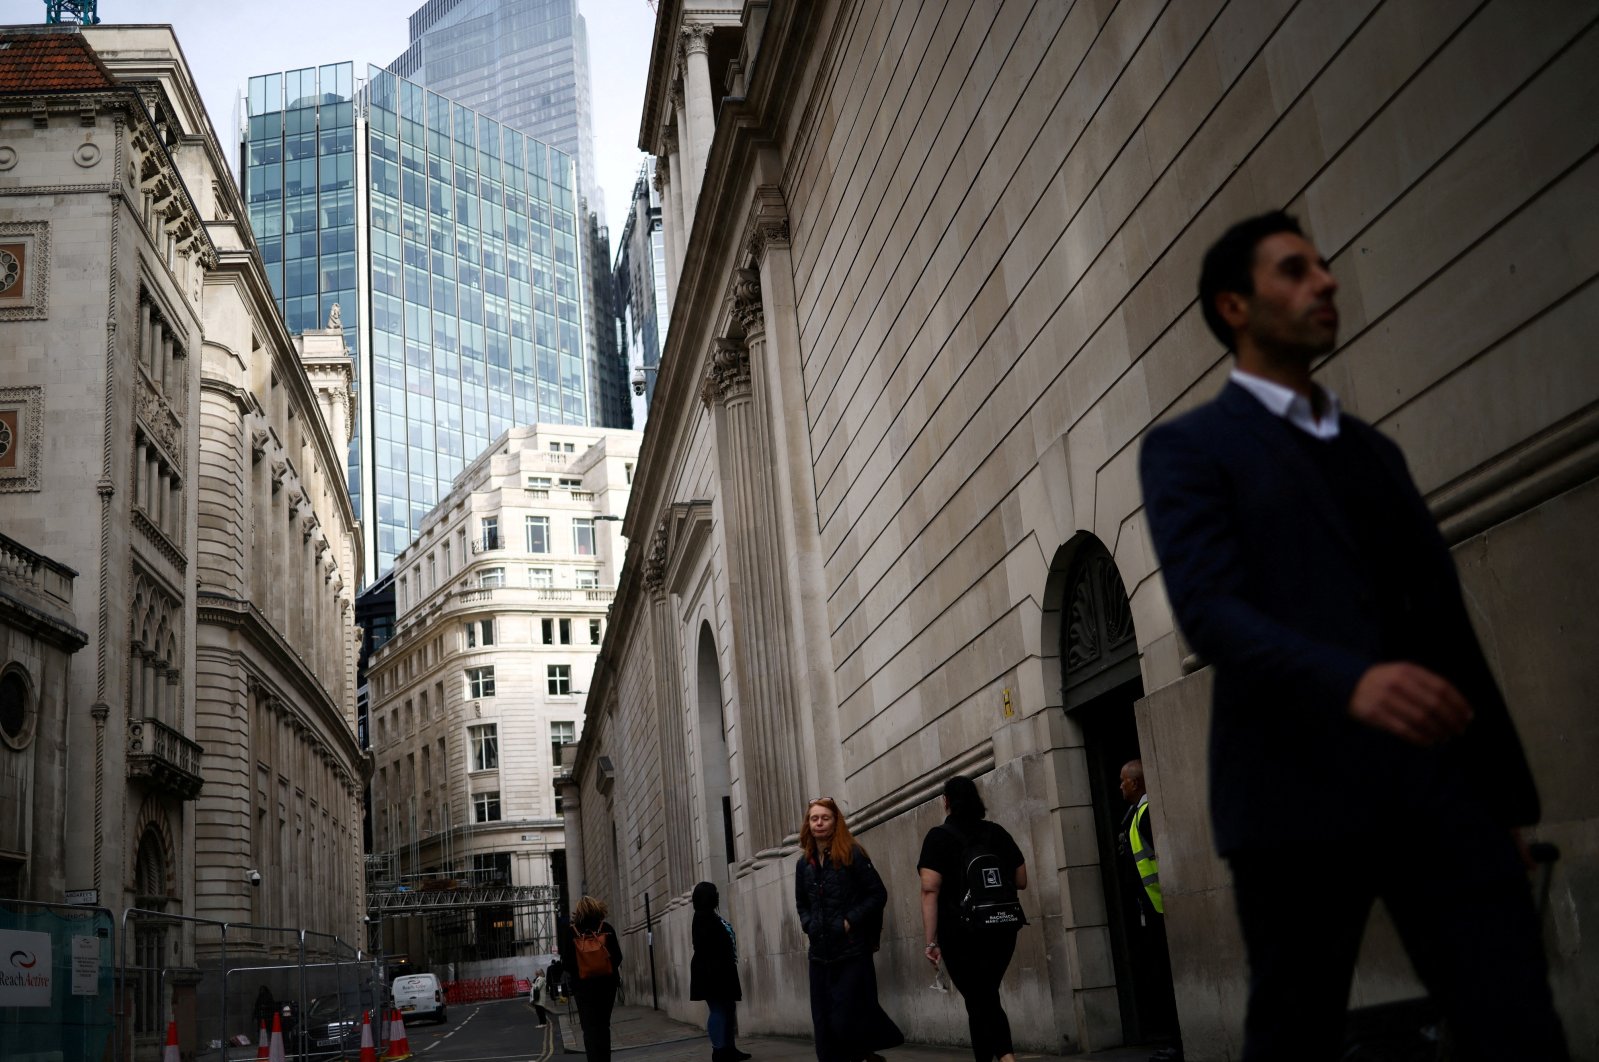 People exit the Bank of England in London, Britain, Oct. 3, 2022. (Reuters Photo)